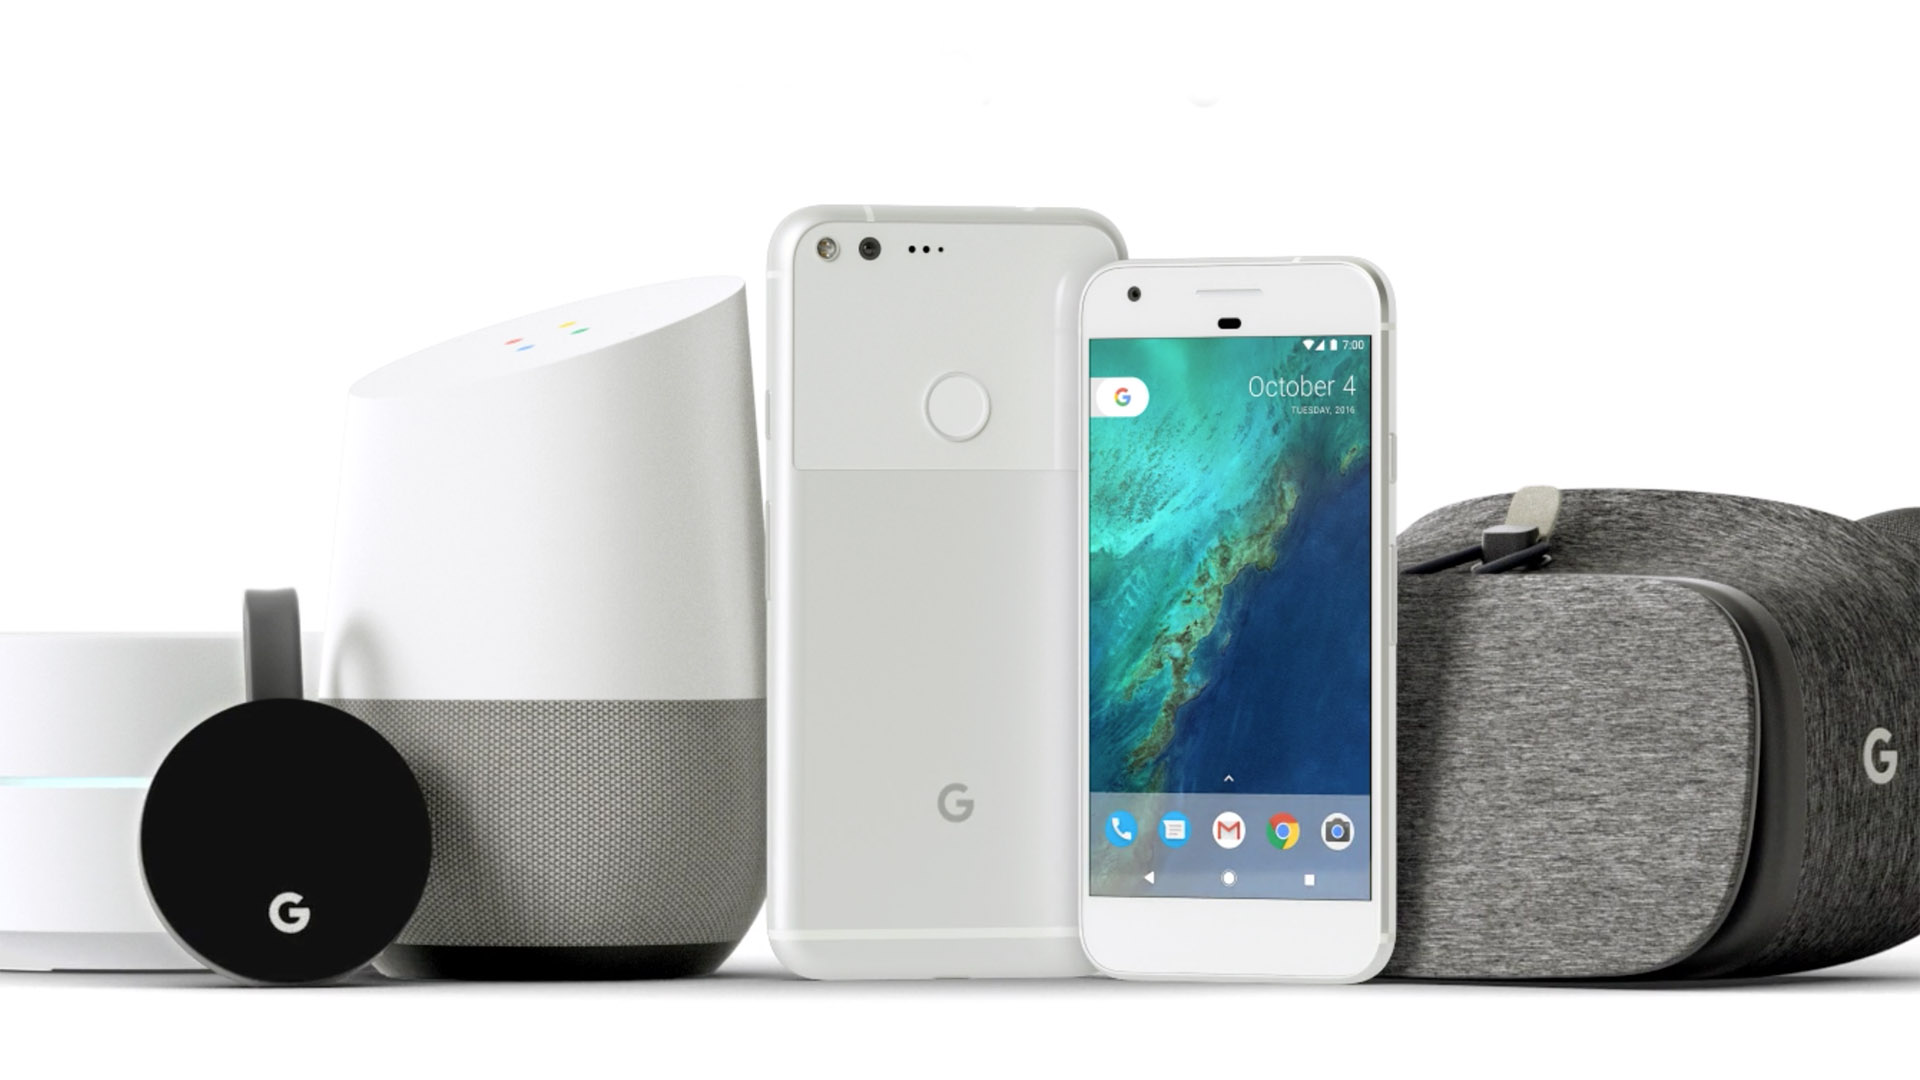 VR, phones and the ‘Personal Assistant’: Google’s newest gadgets